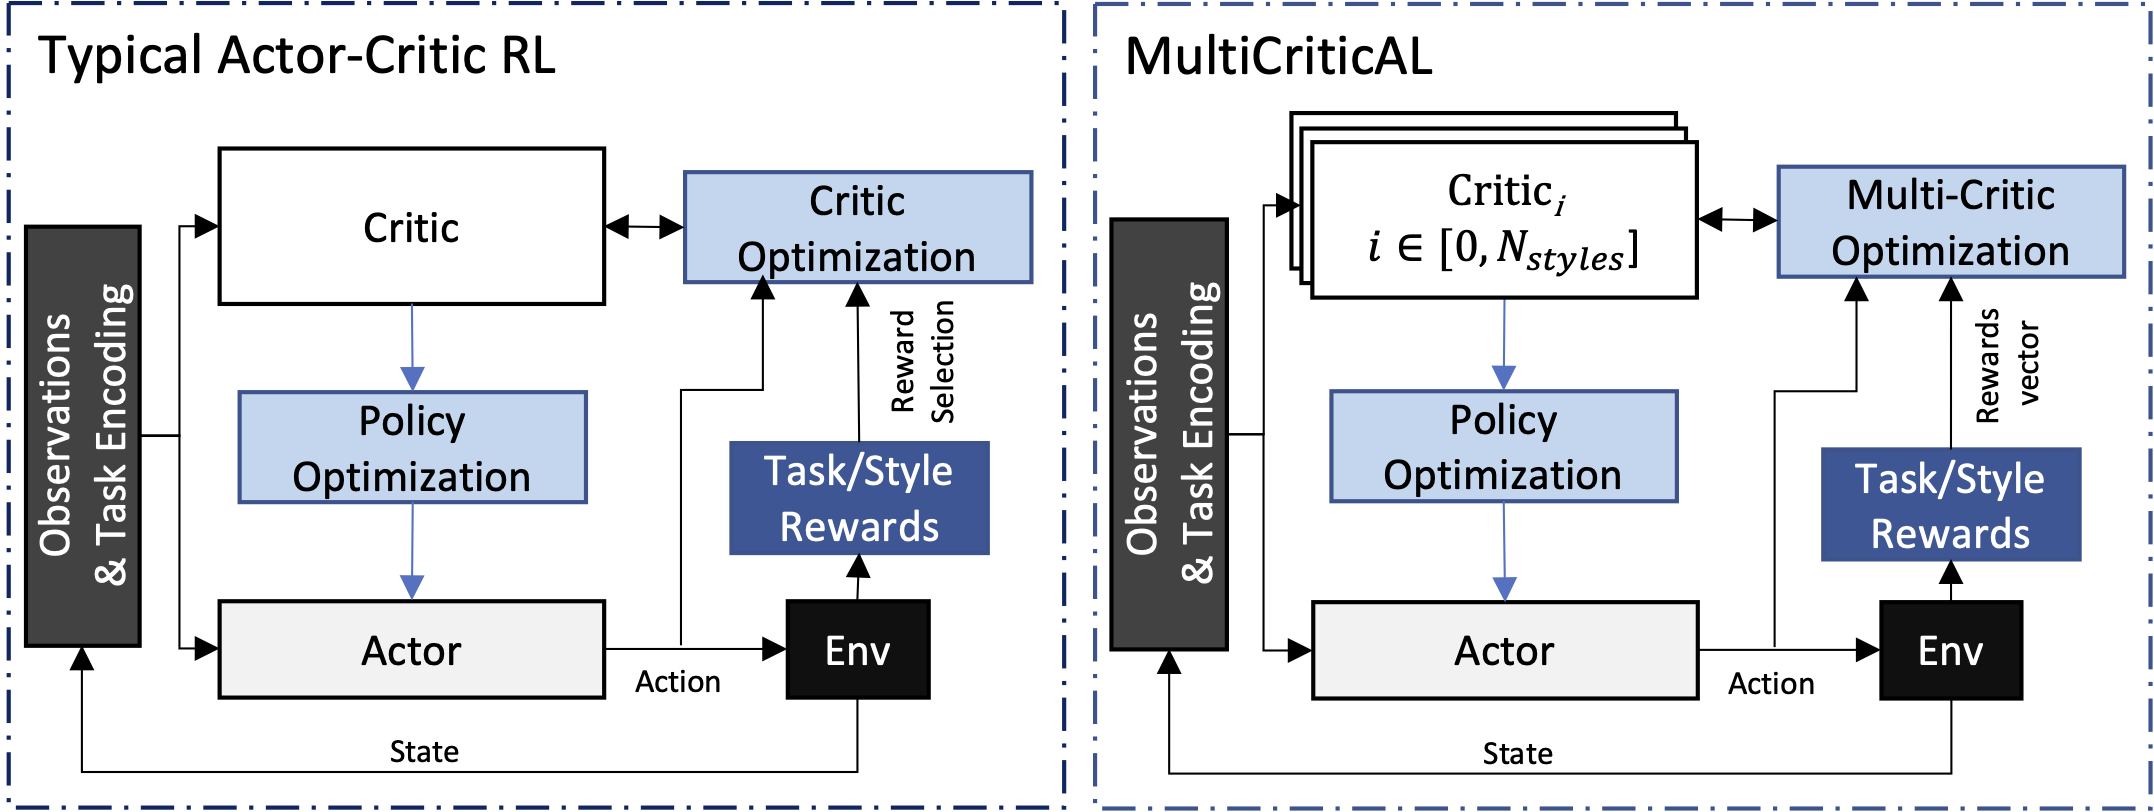 MultiCriticAL Overview